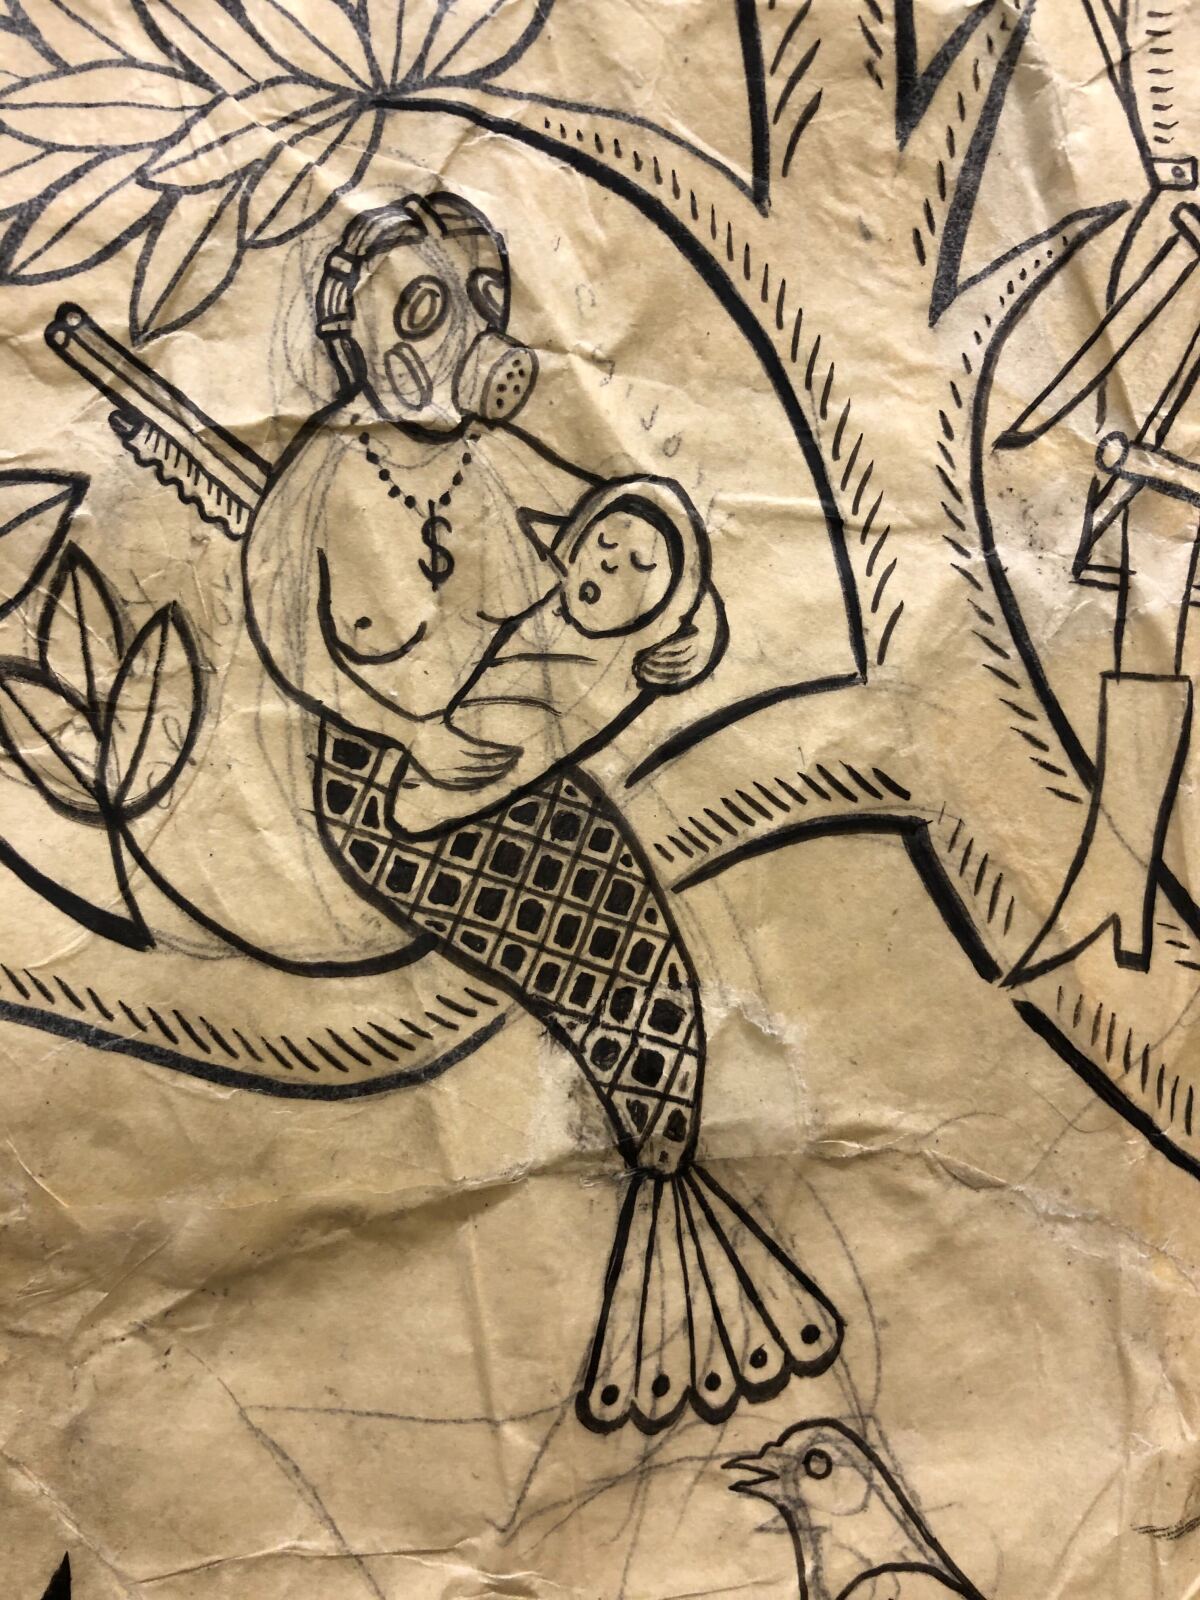 An ink and paper drawing shows a mermaid in a gas mask holding an infant